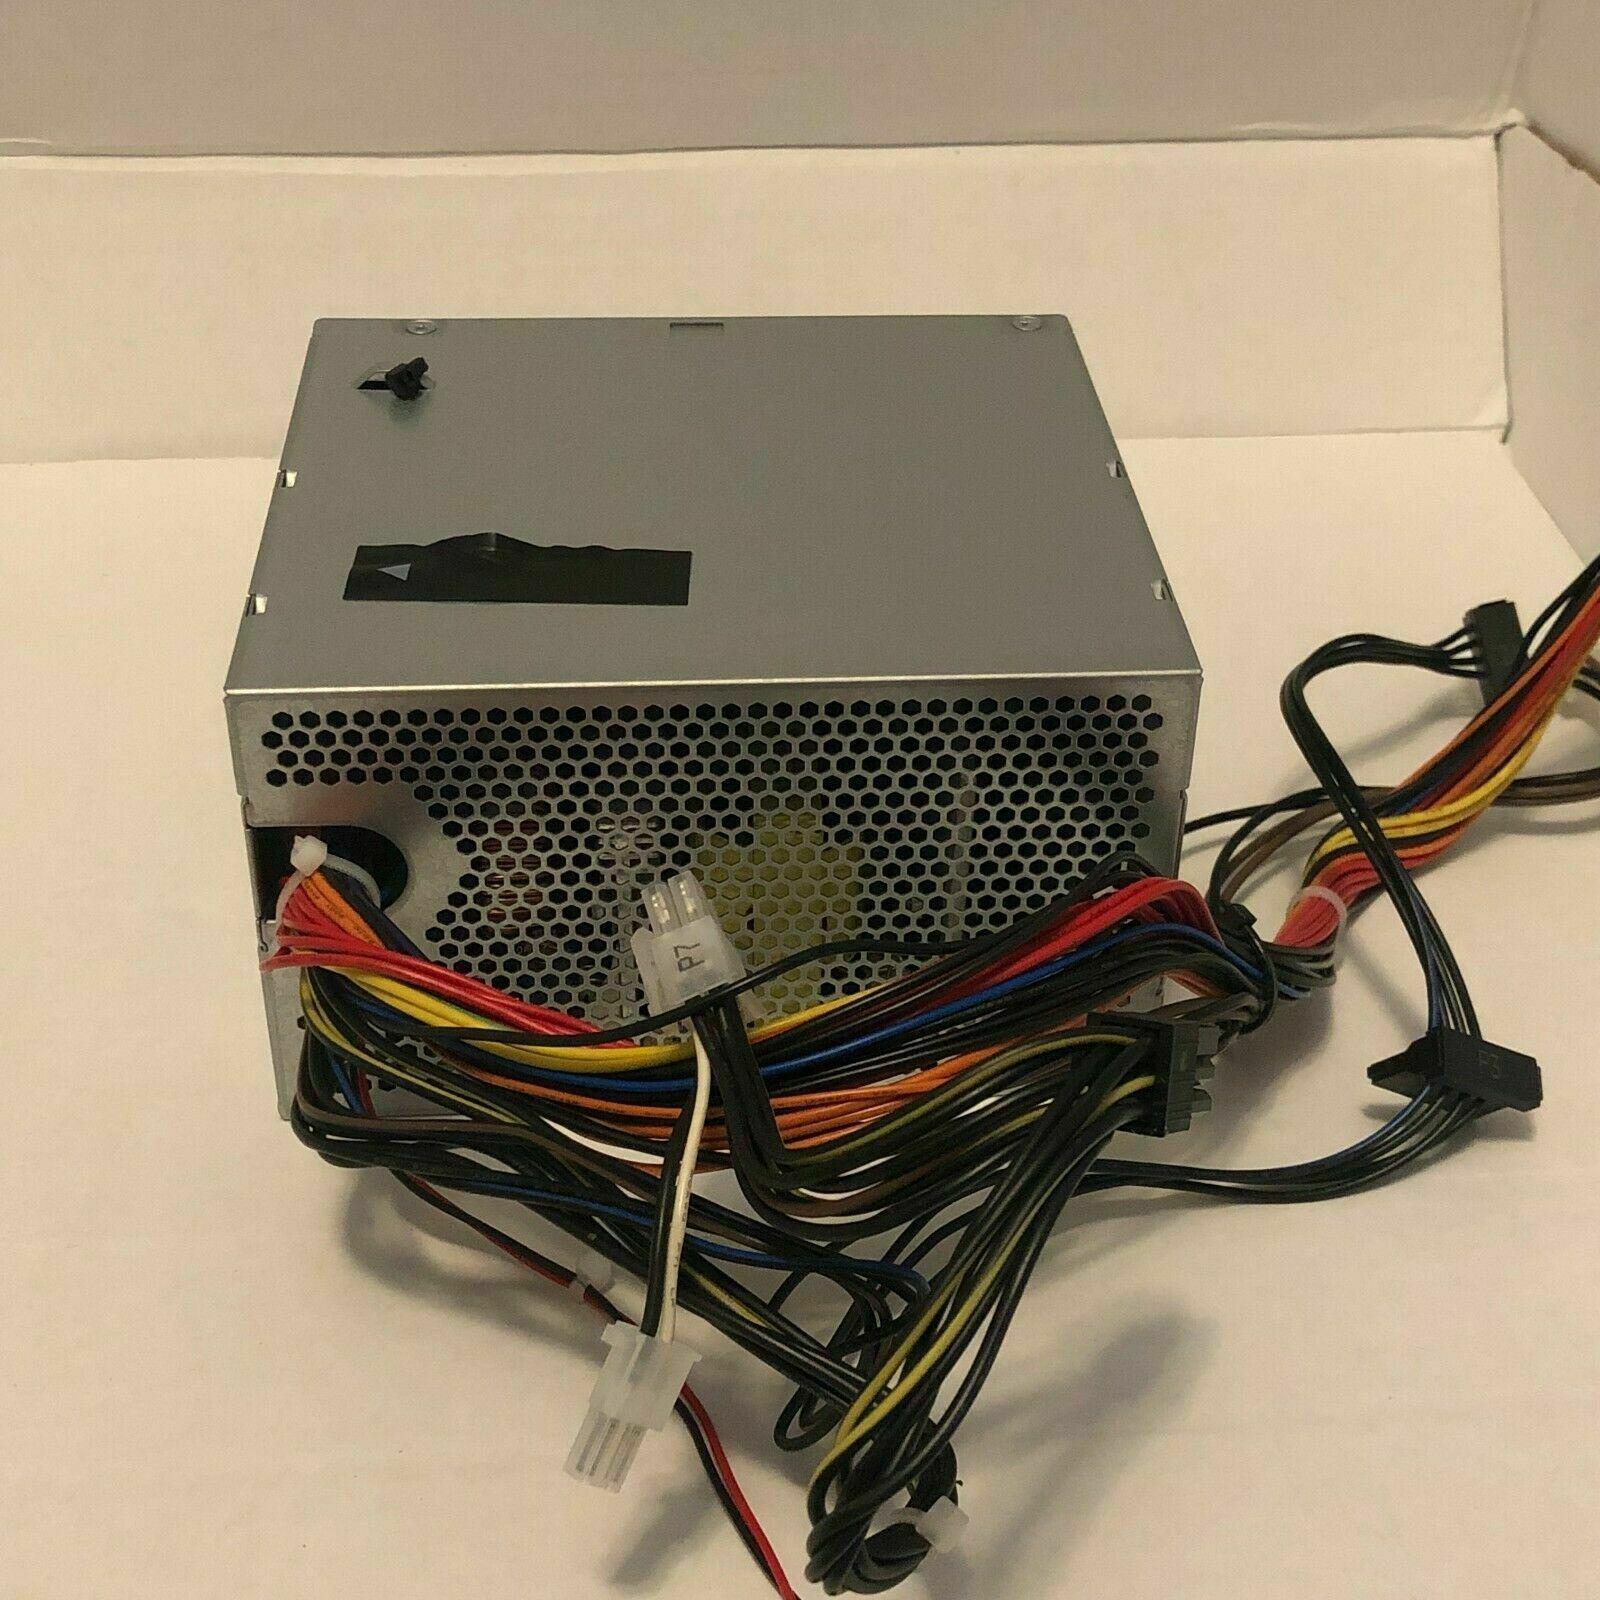 PS 6301 07 832005 001 power supply gamay2 gfx 300w atx e star6